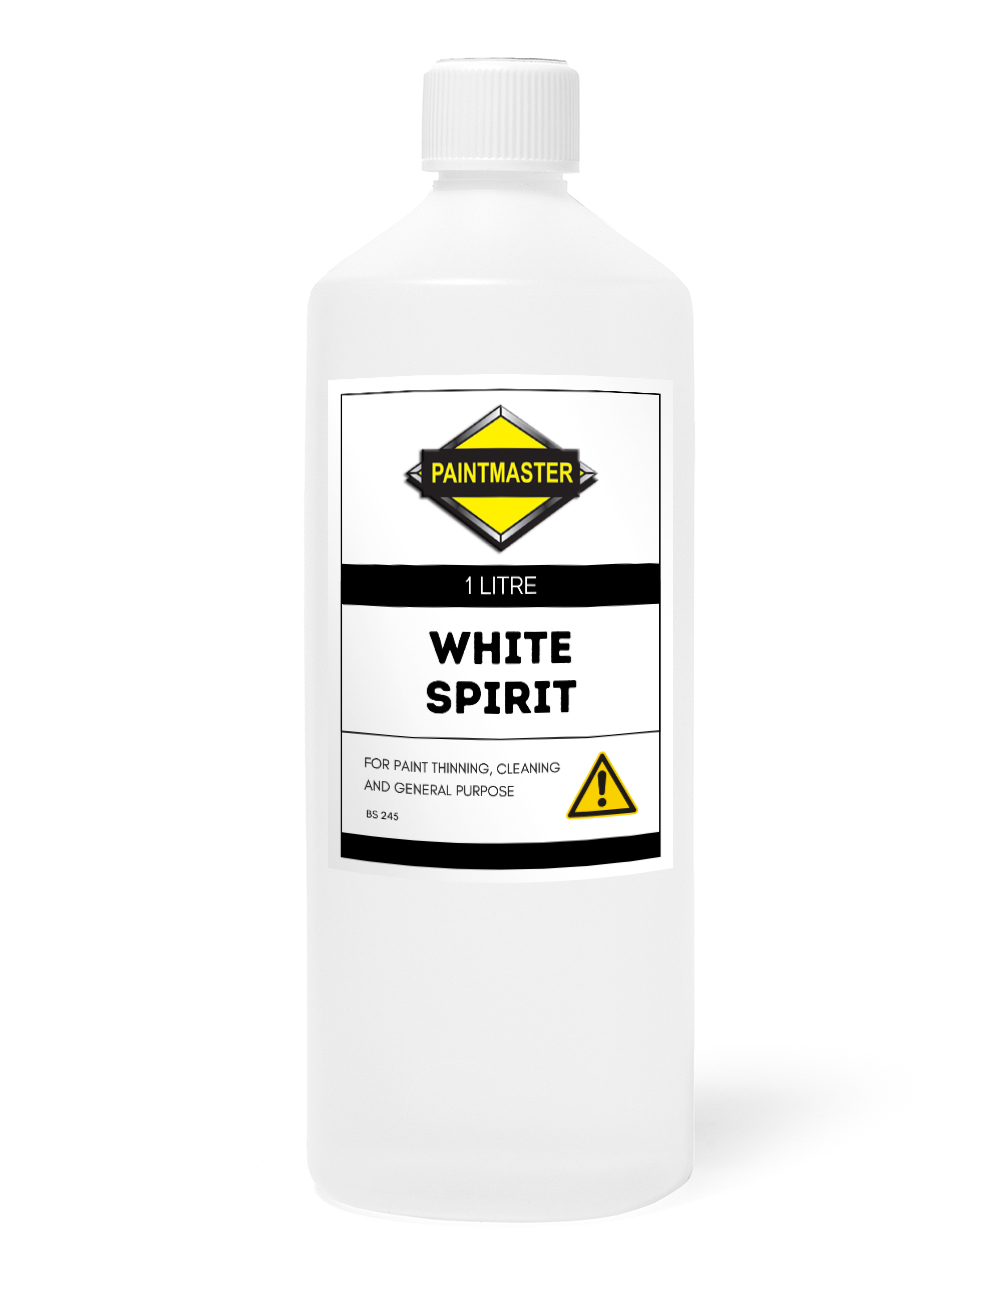 Is White Spirit Good For Cleaning